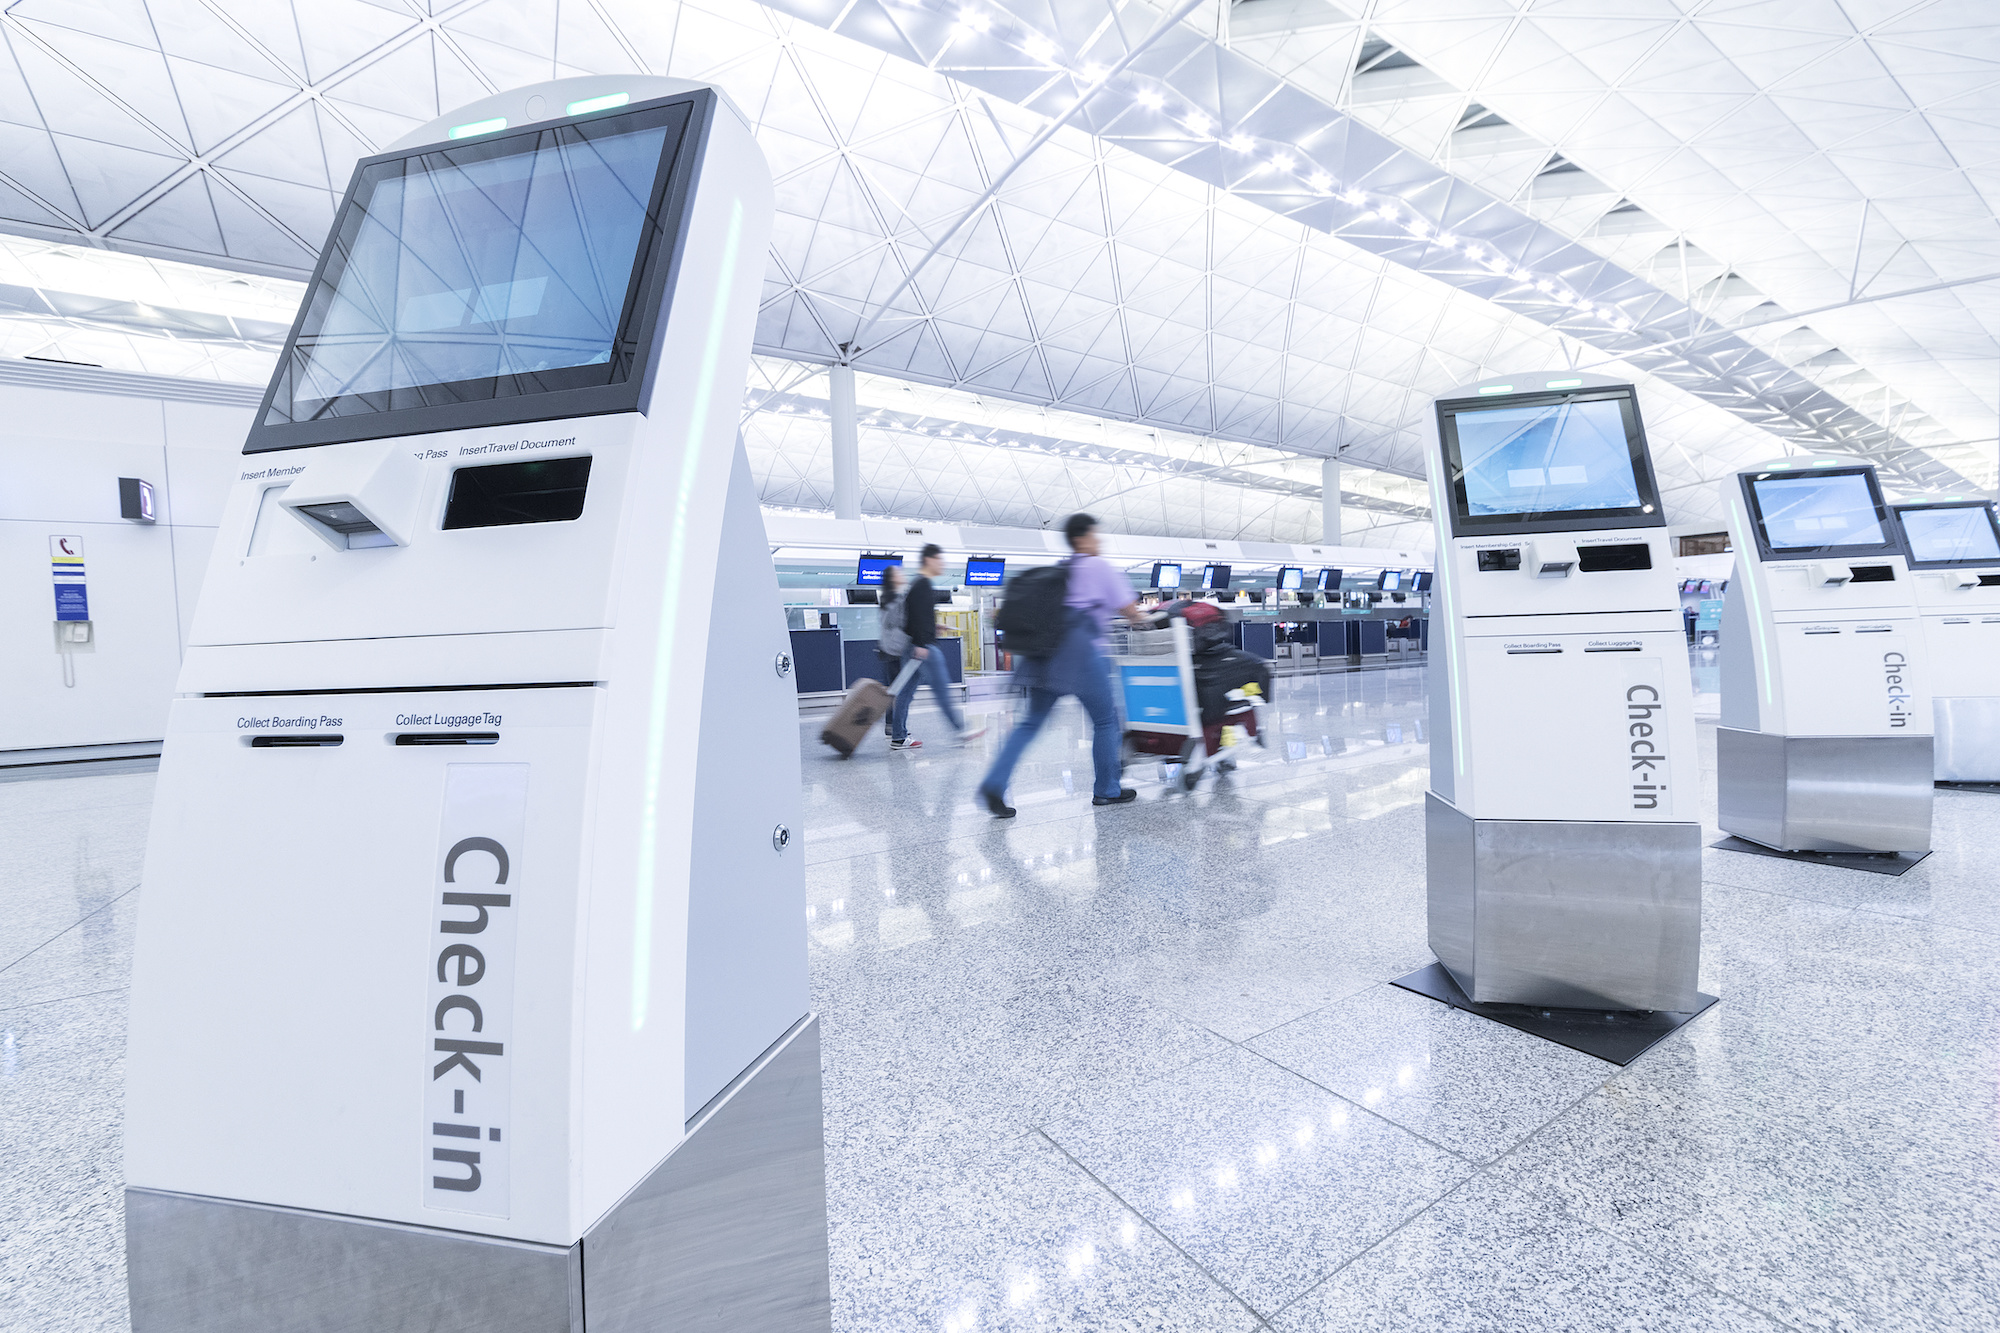 Self check-in kiosks at airport